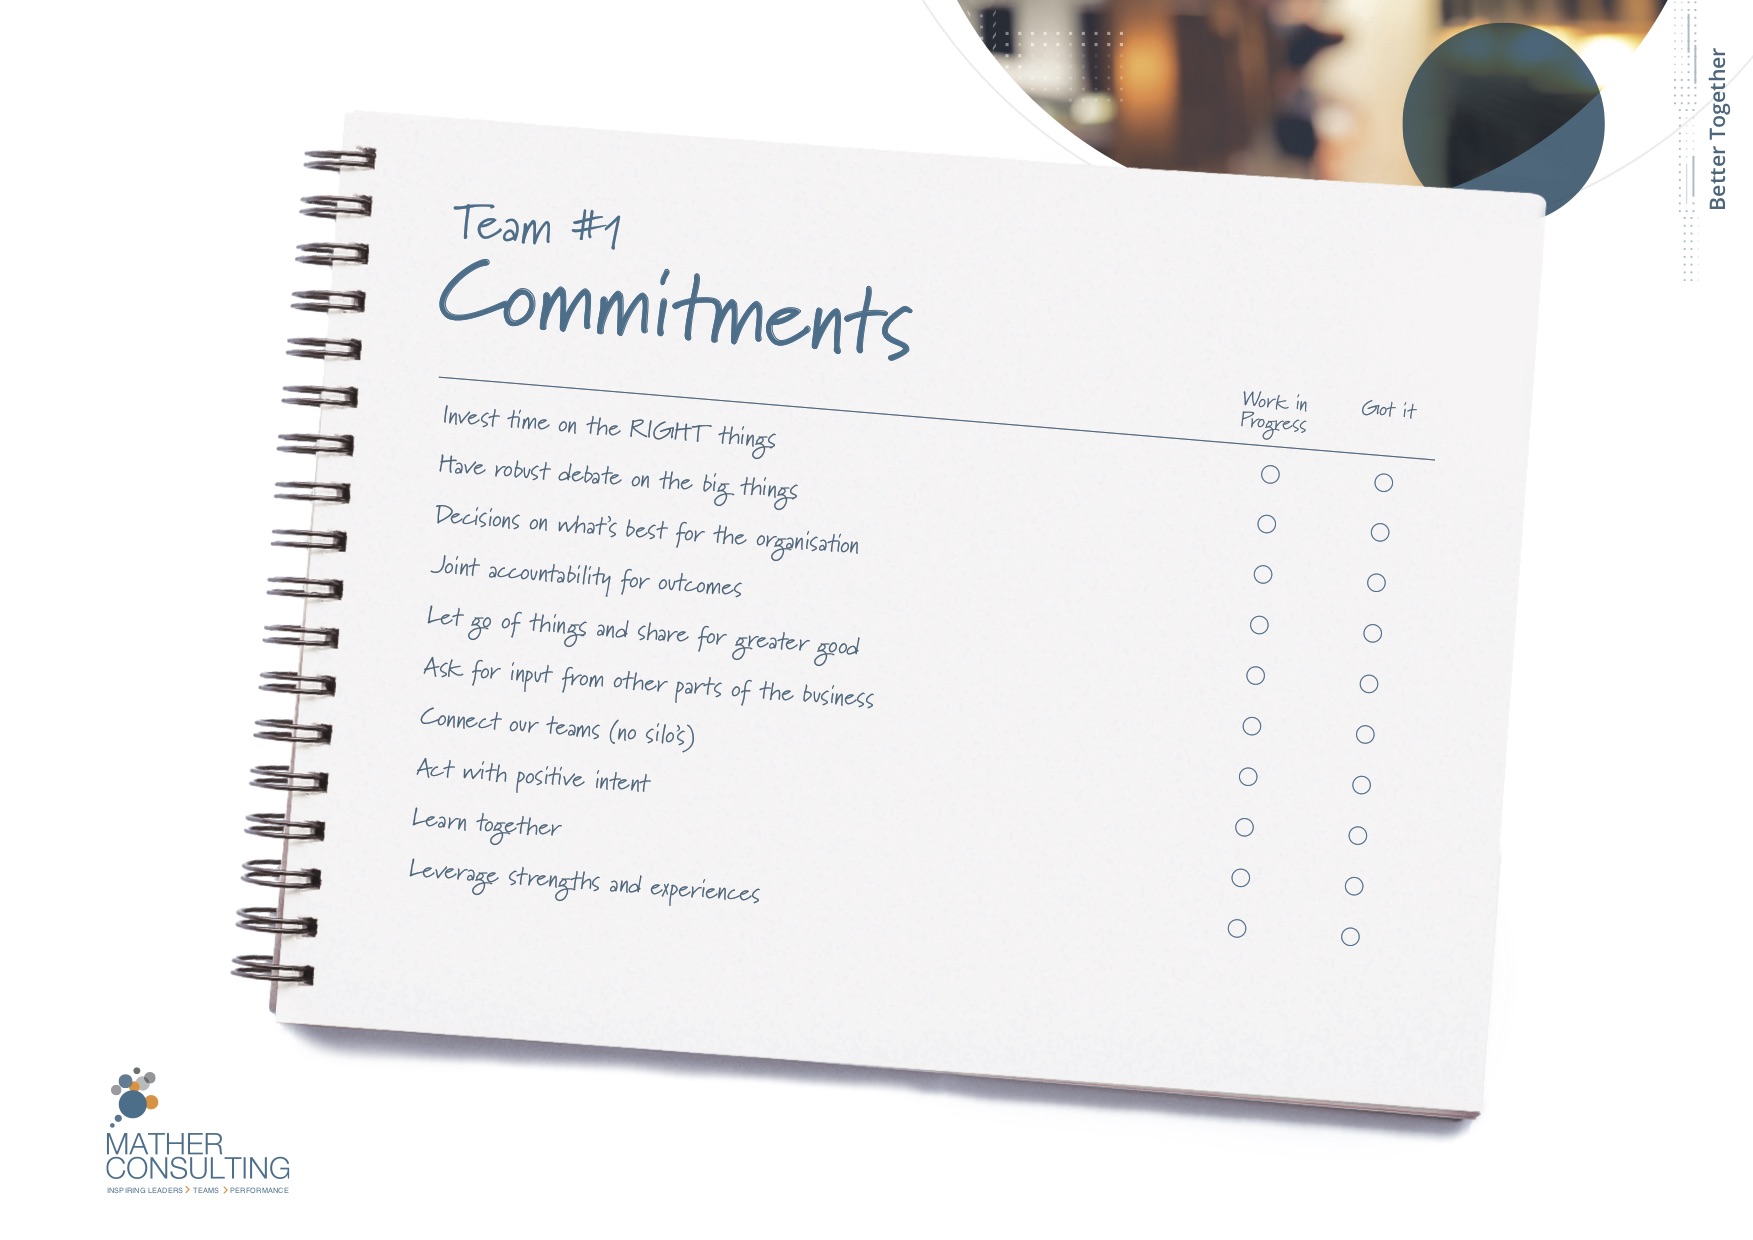 Mather Consulting - Team#1 Commitments Checklist